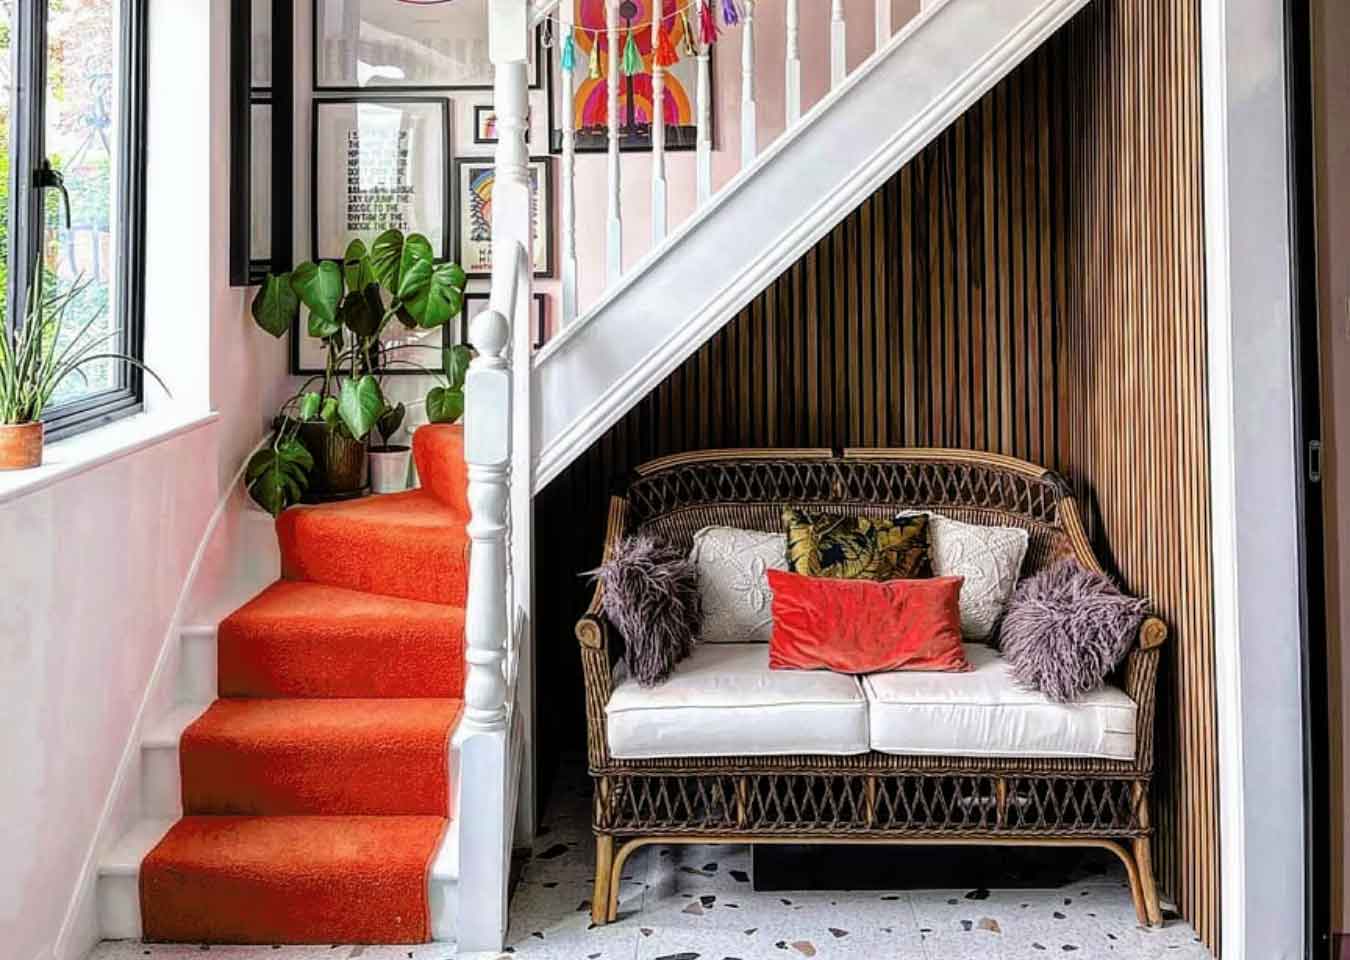 A white staircase with an orange runner, multicoloured wall art, green plants, wood panelling under the stairs and a rattan sofa.